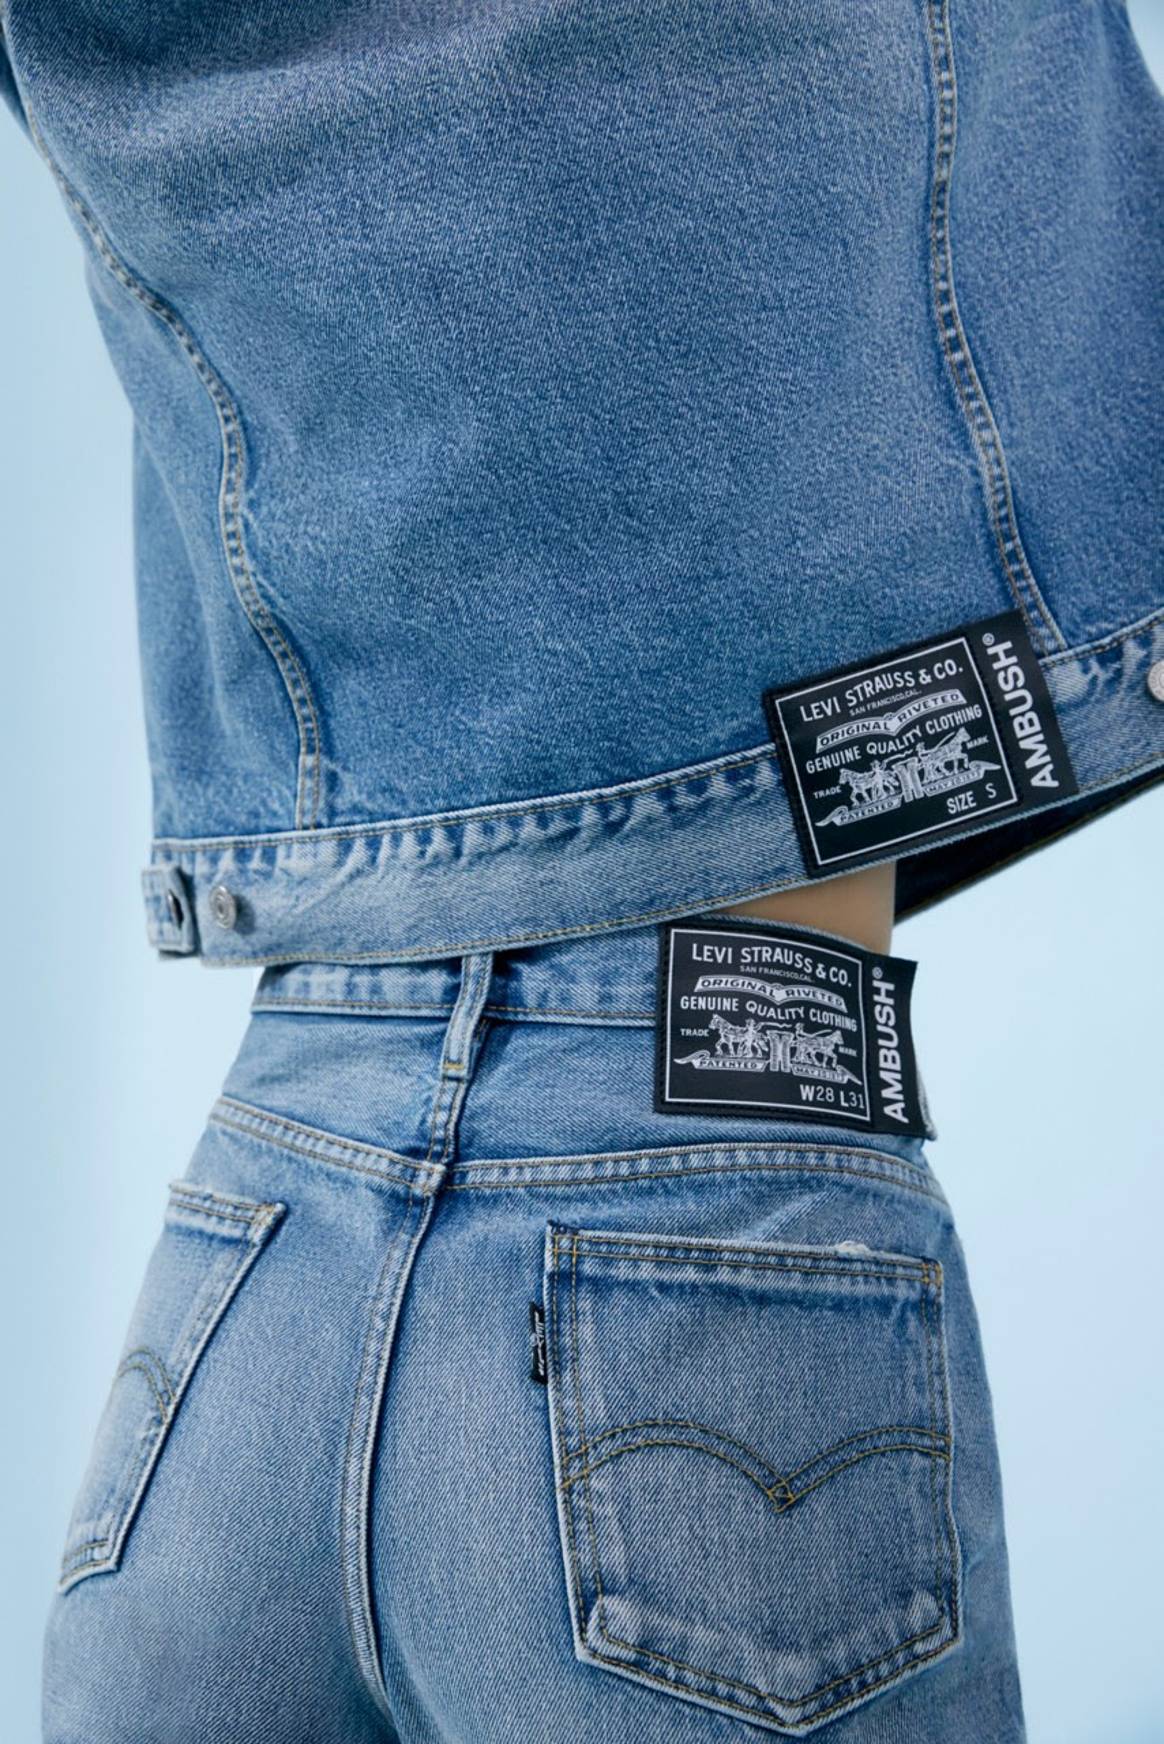 Picture: Levi's, courtesy of the brand